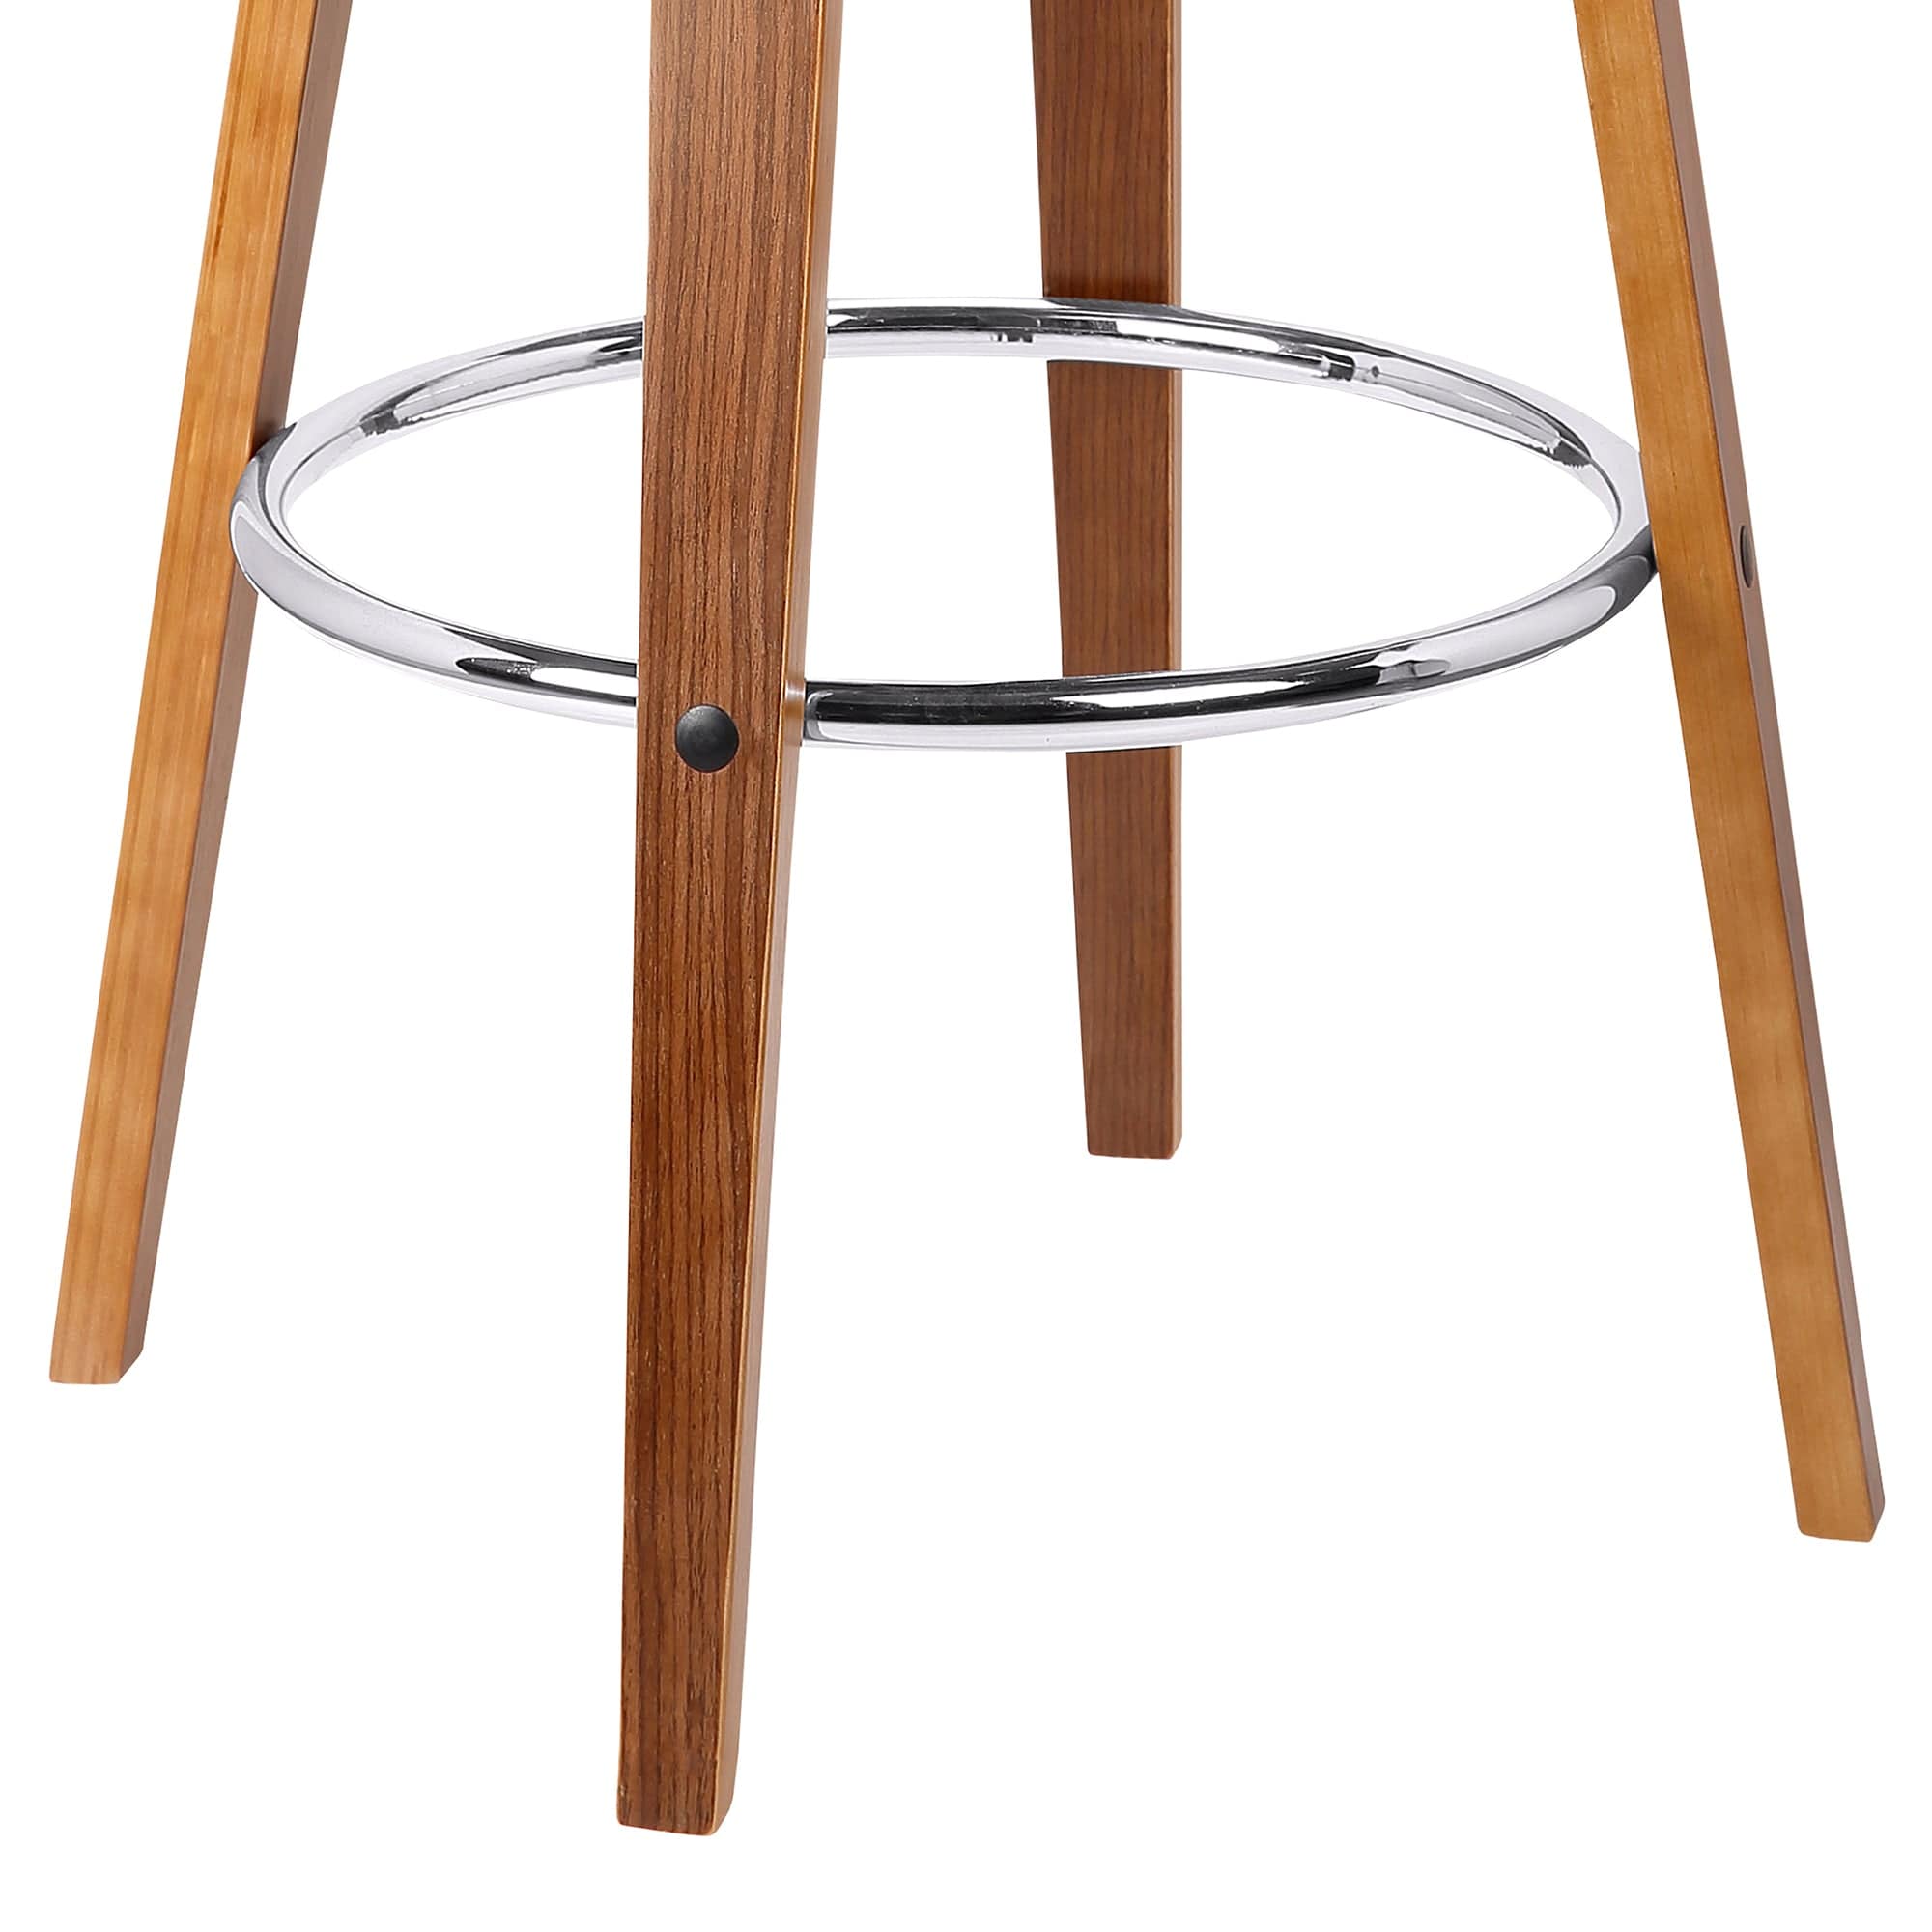 Armen Living Barstool Armen Living - Solvang 26" Swivel Brown Faux Leather and Walnut Wood Counter Stool | LCSLBABRWA26